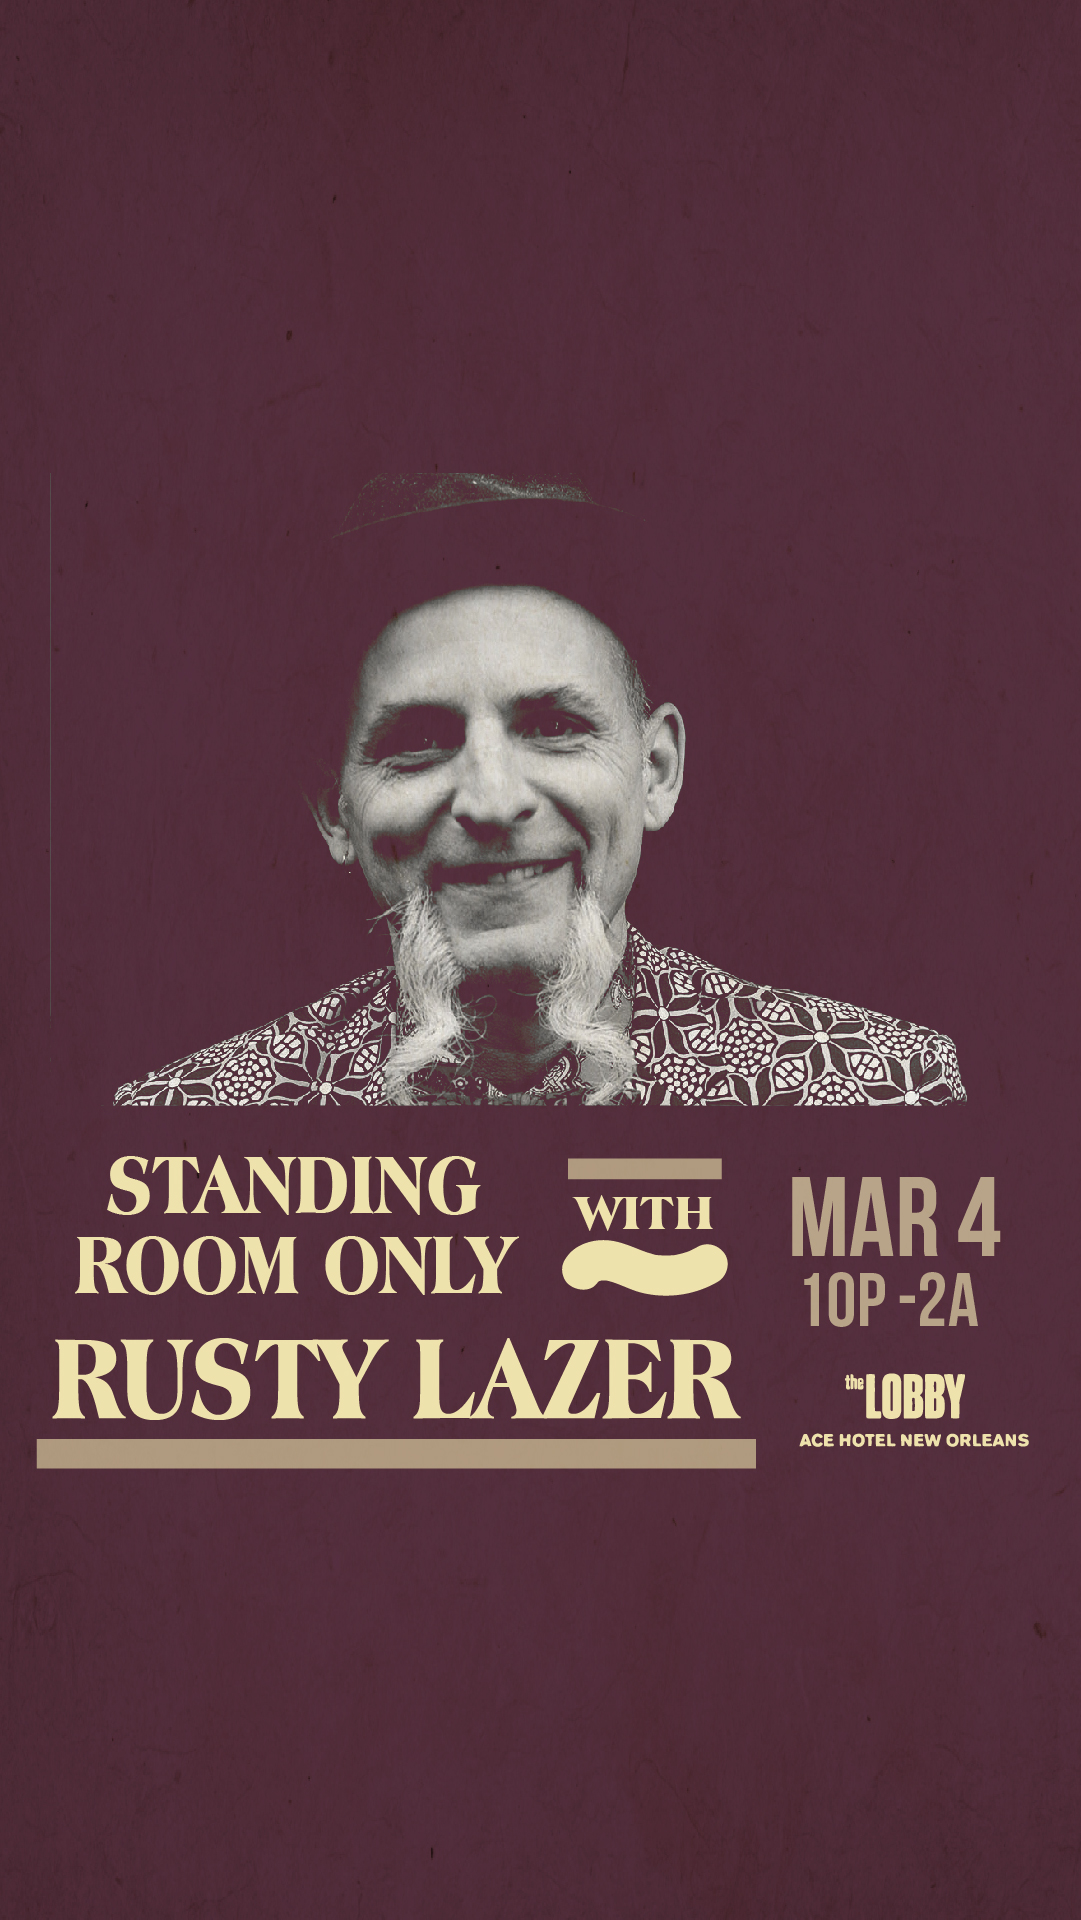 Standing Room Only w Rusty Lazer - March 4